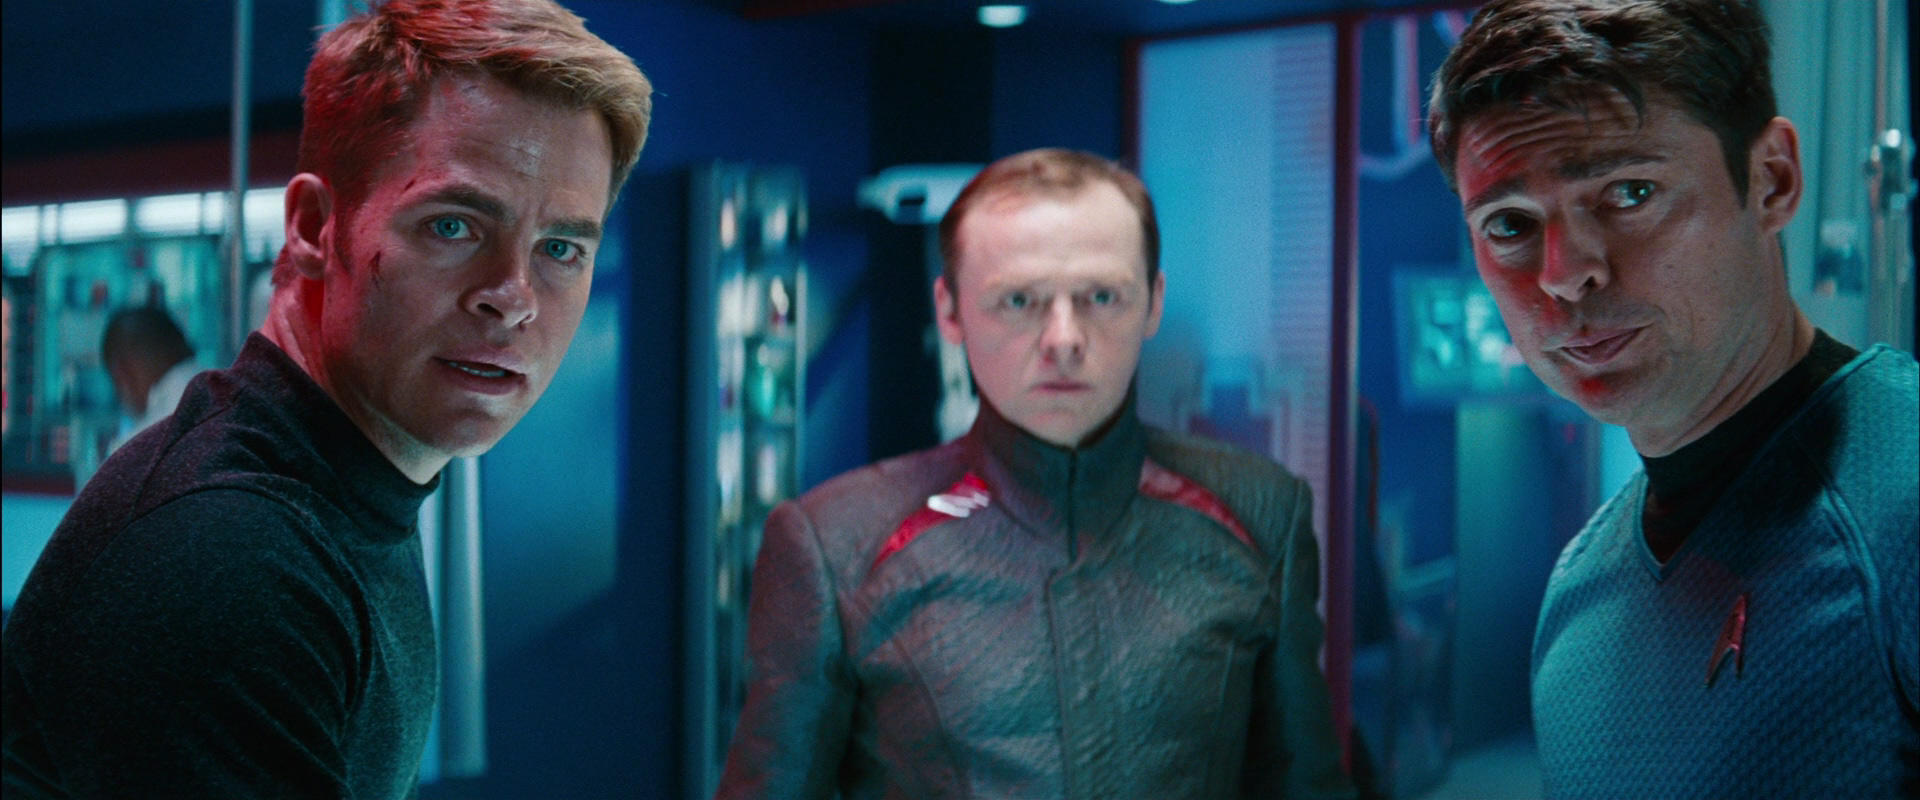 Simon Pegg Drops Hint That Star Trek 4 Is In The Works